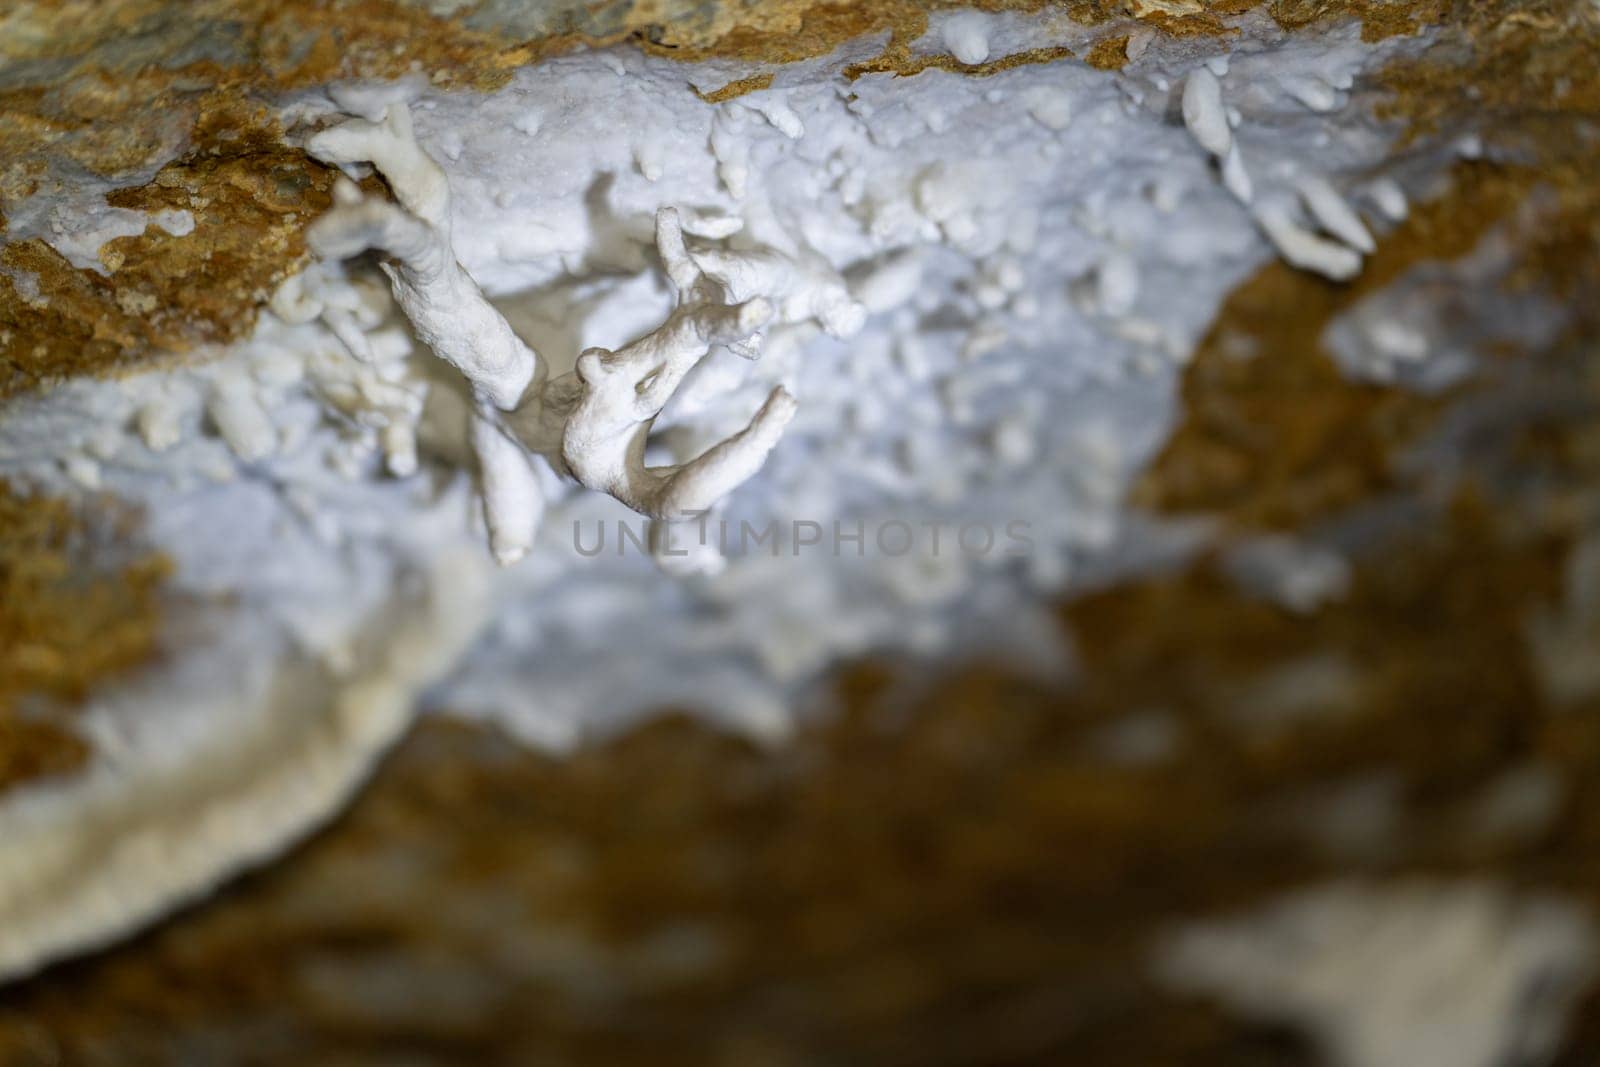 Peculiar white formations in a cave look like alien landscapes.